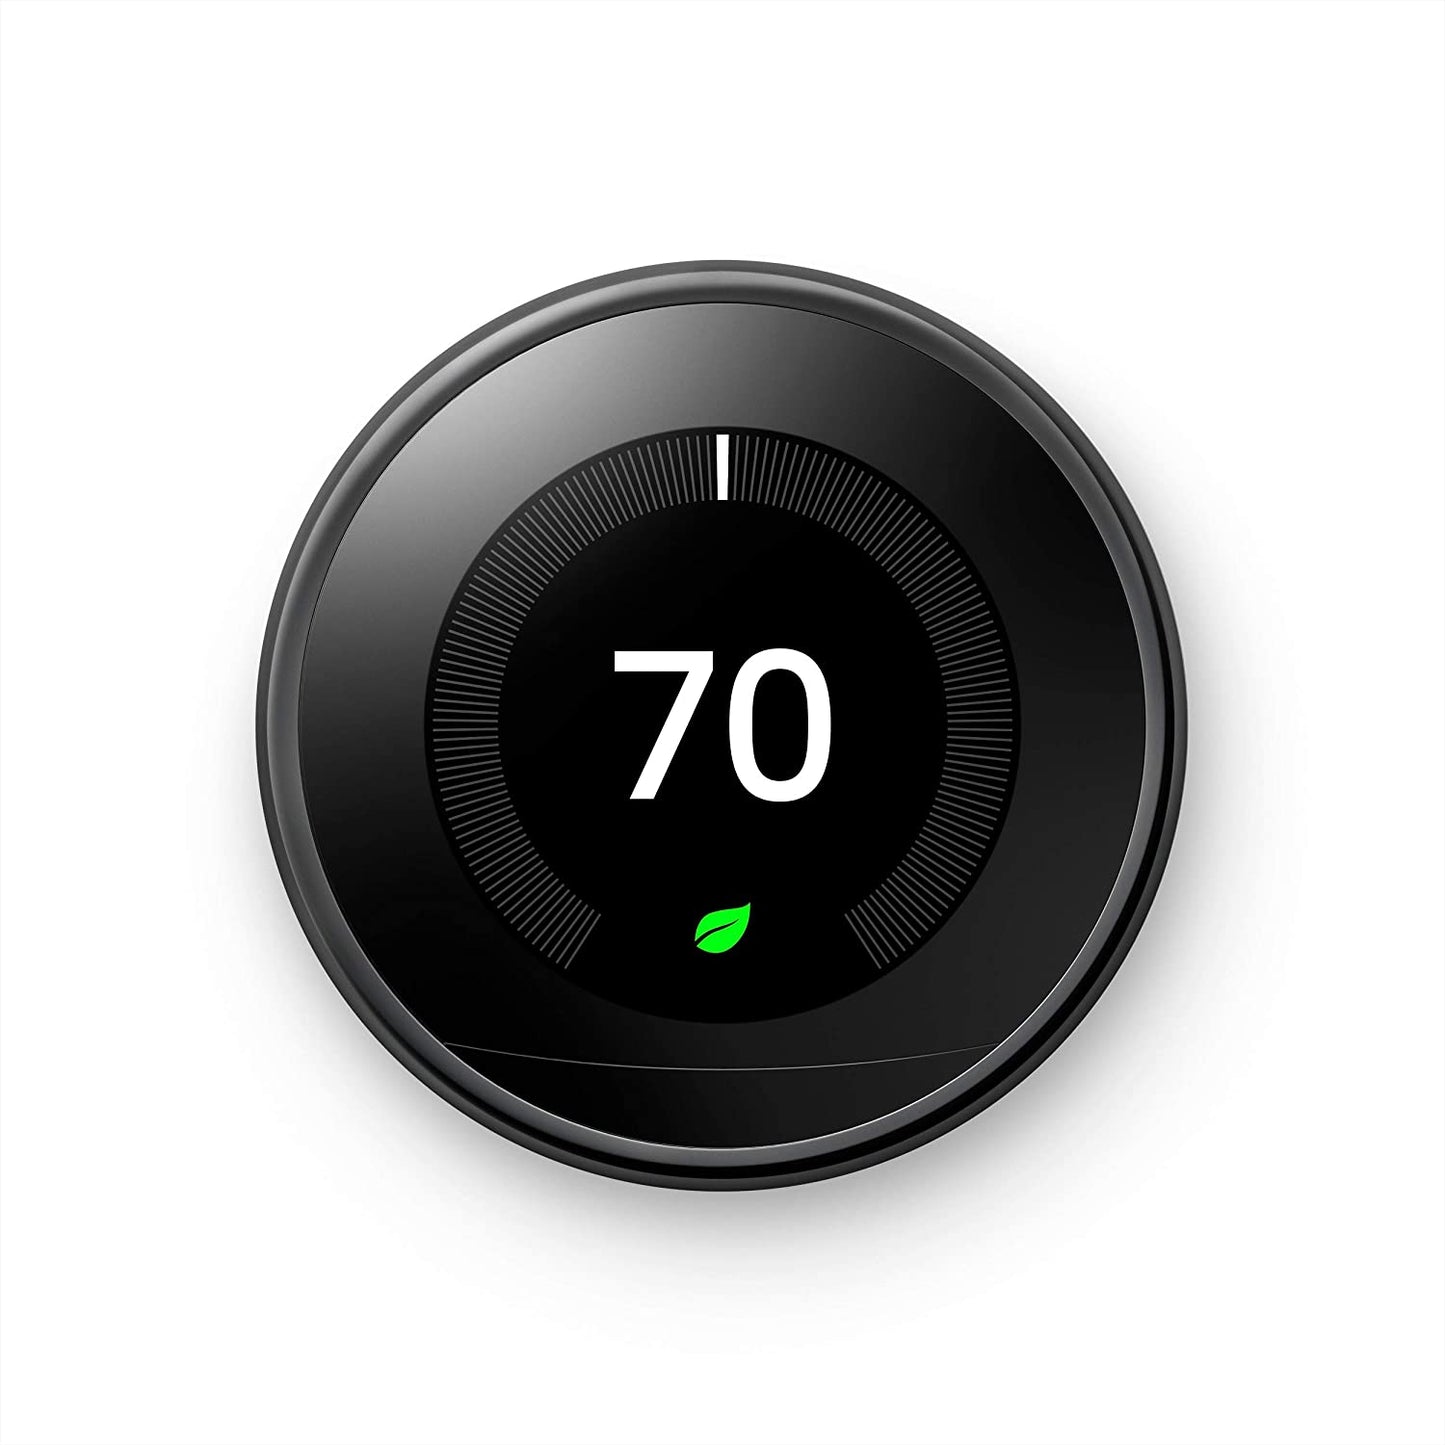 Google Nest Learning Smart Wifi Thermostat - Black (T3018US) - Nyson Retail